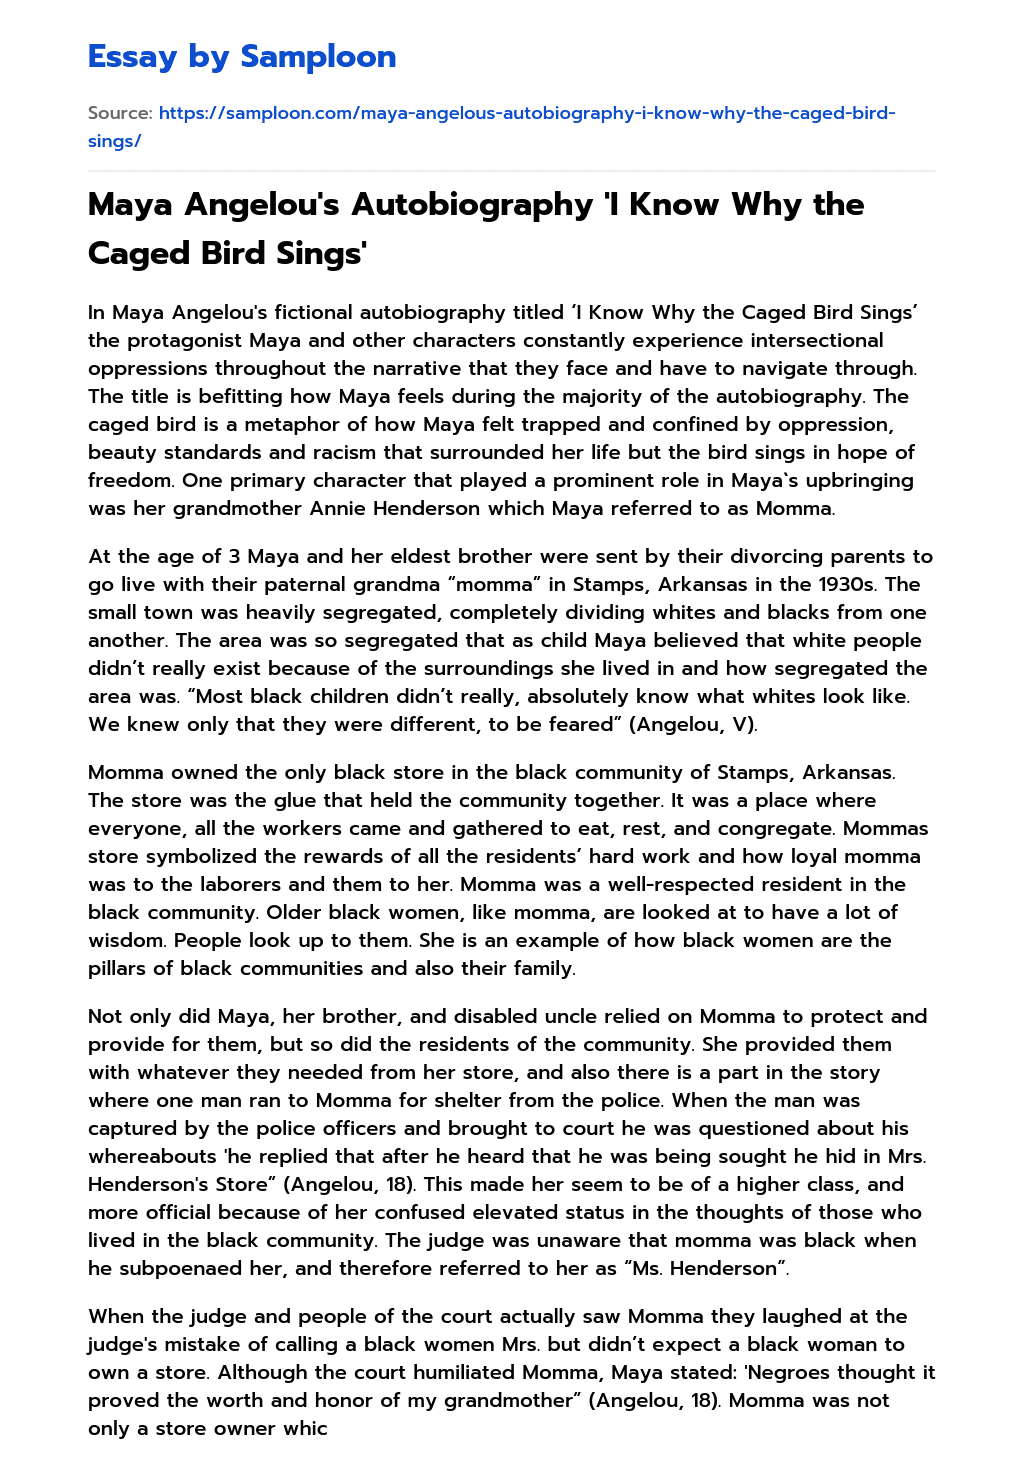 Maya Angelou’s Autobiography ‘I Know Why the Caged Bird Sings’ essay